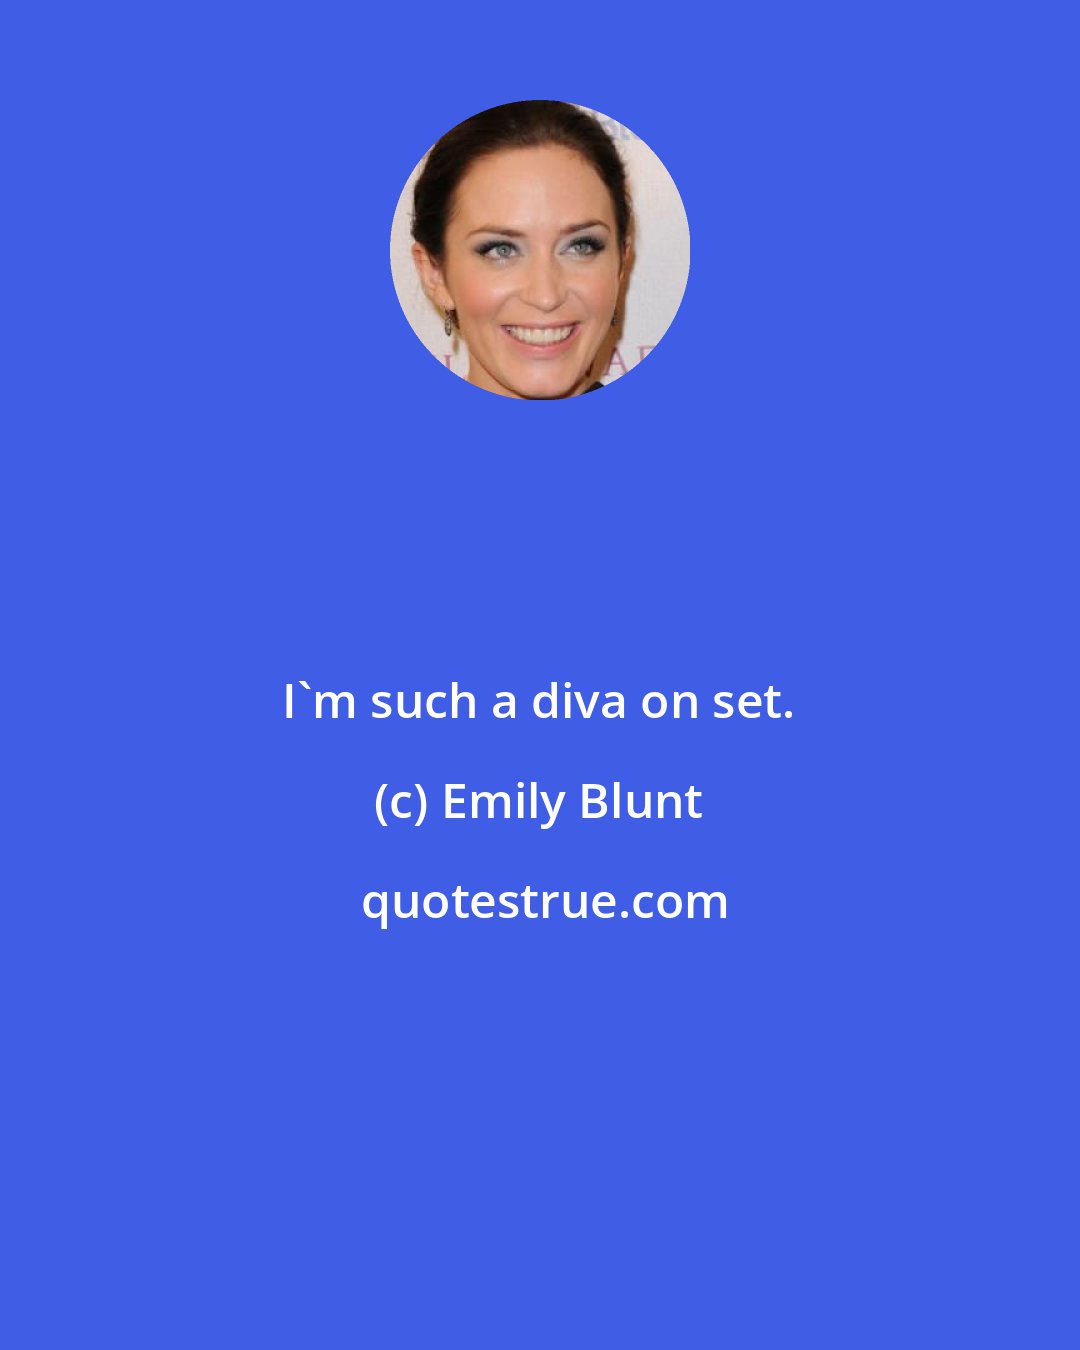 Emily Blunt: I'm such a diva on set.